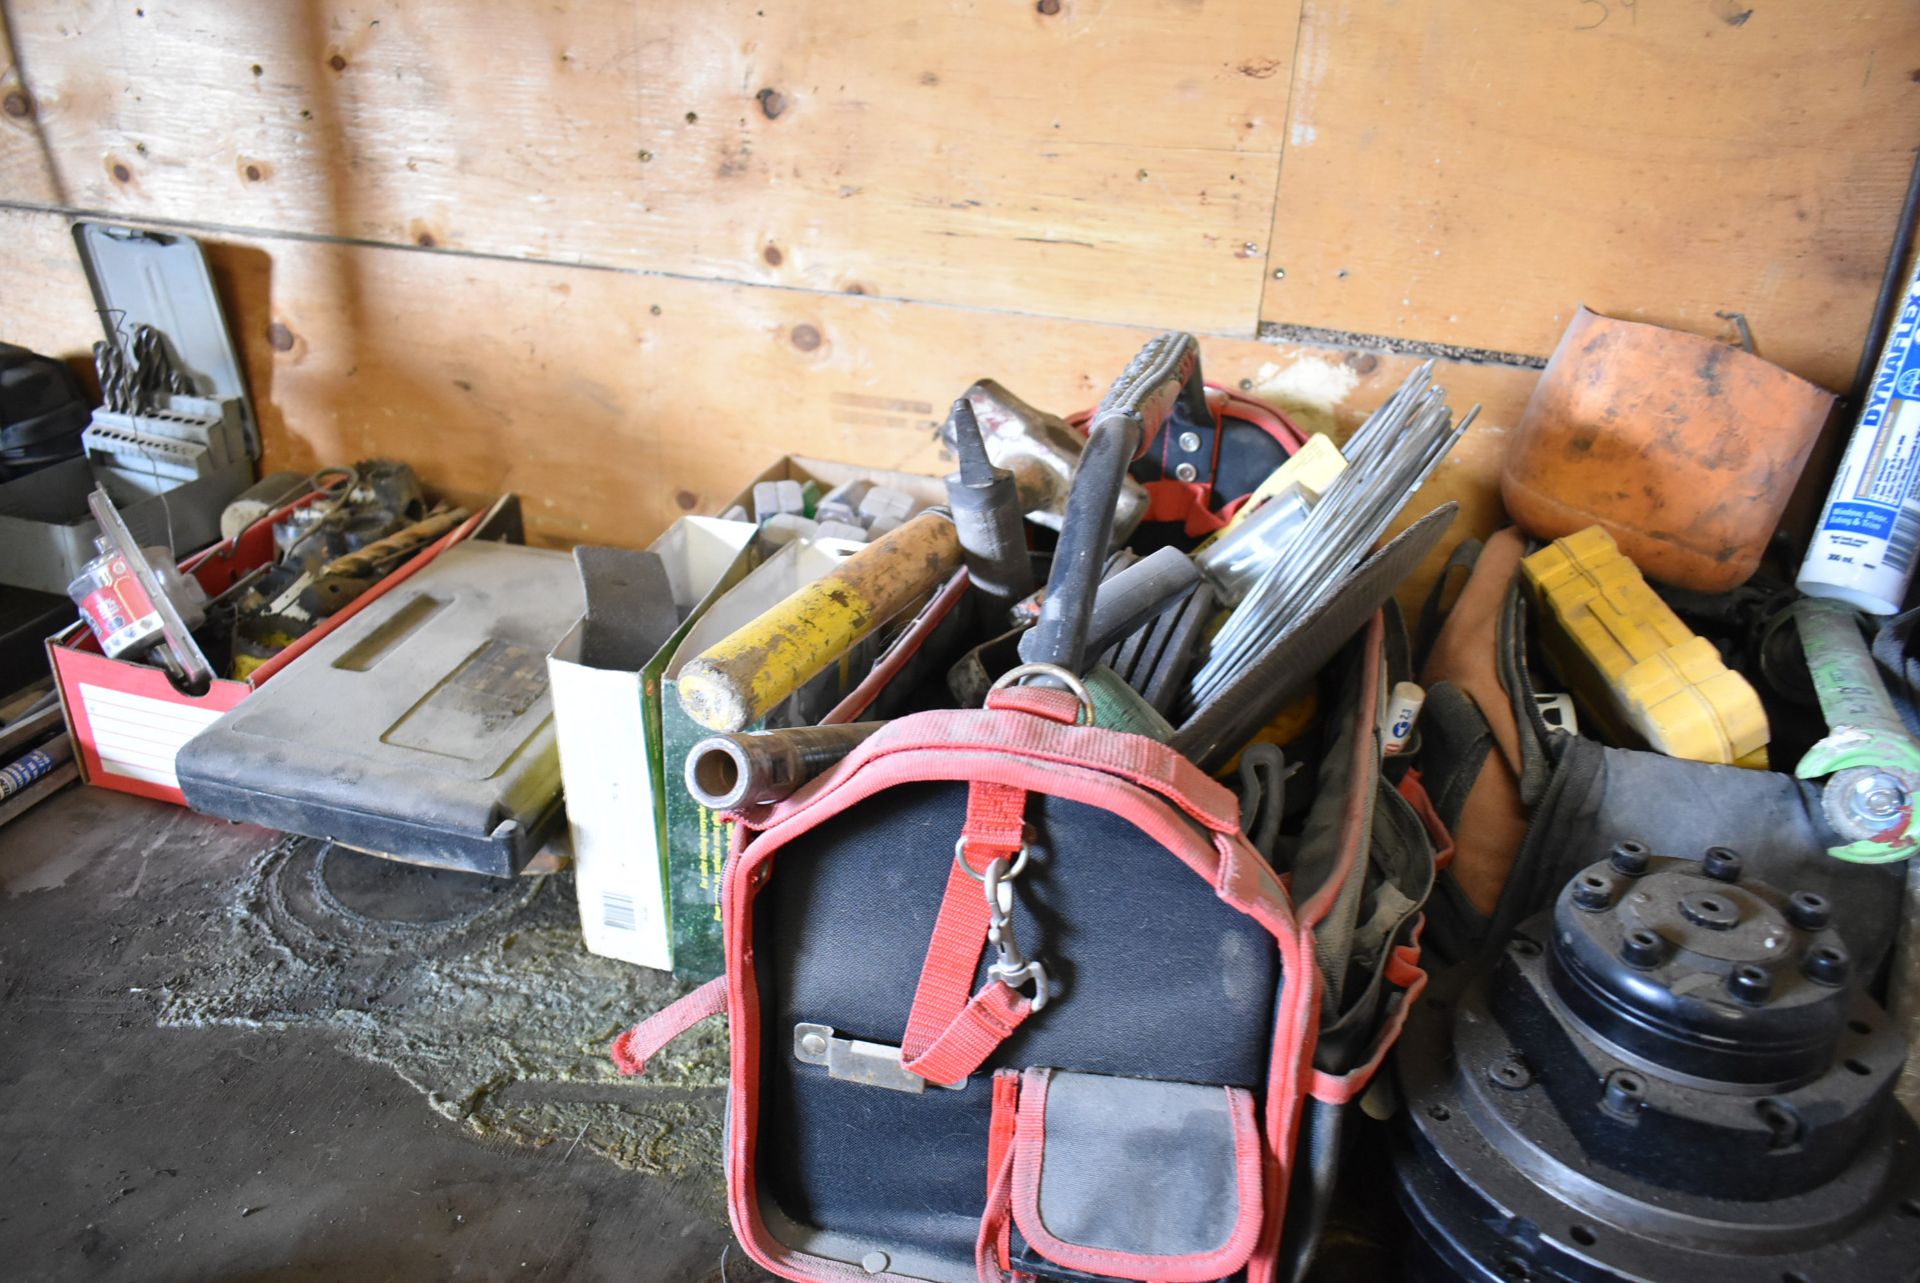 LOT/ SHOP BENCH WITH CONTENTS CONSISTING OF HAND TOOLS, HARDWARE & SUPPLIES - Image 2 of 4